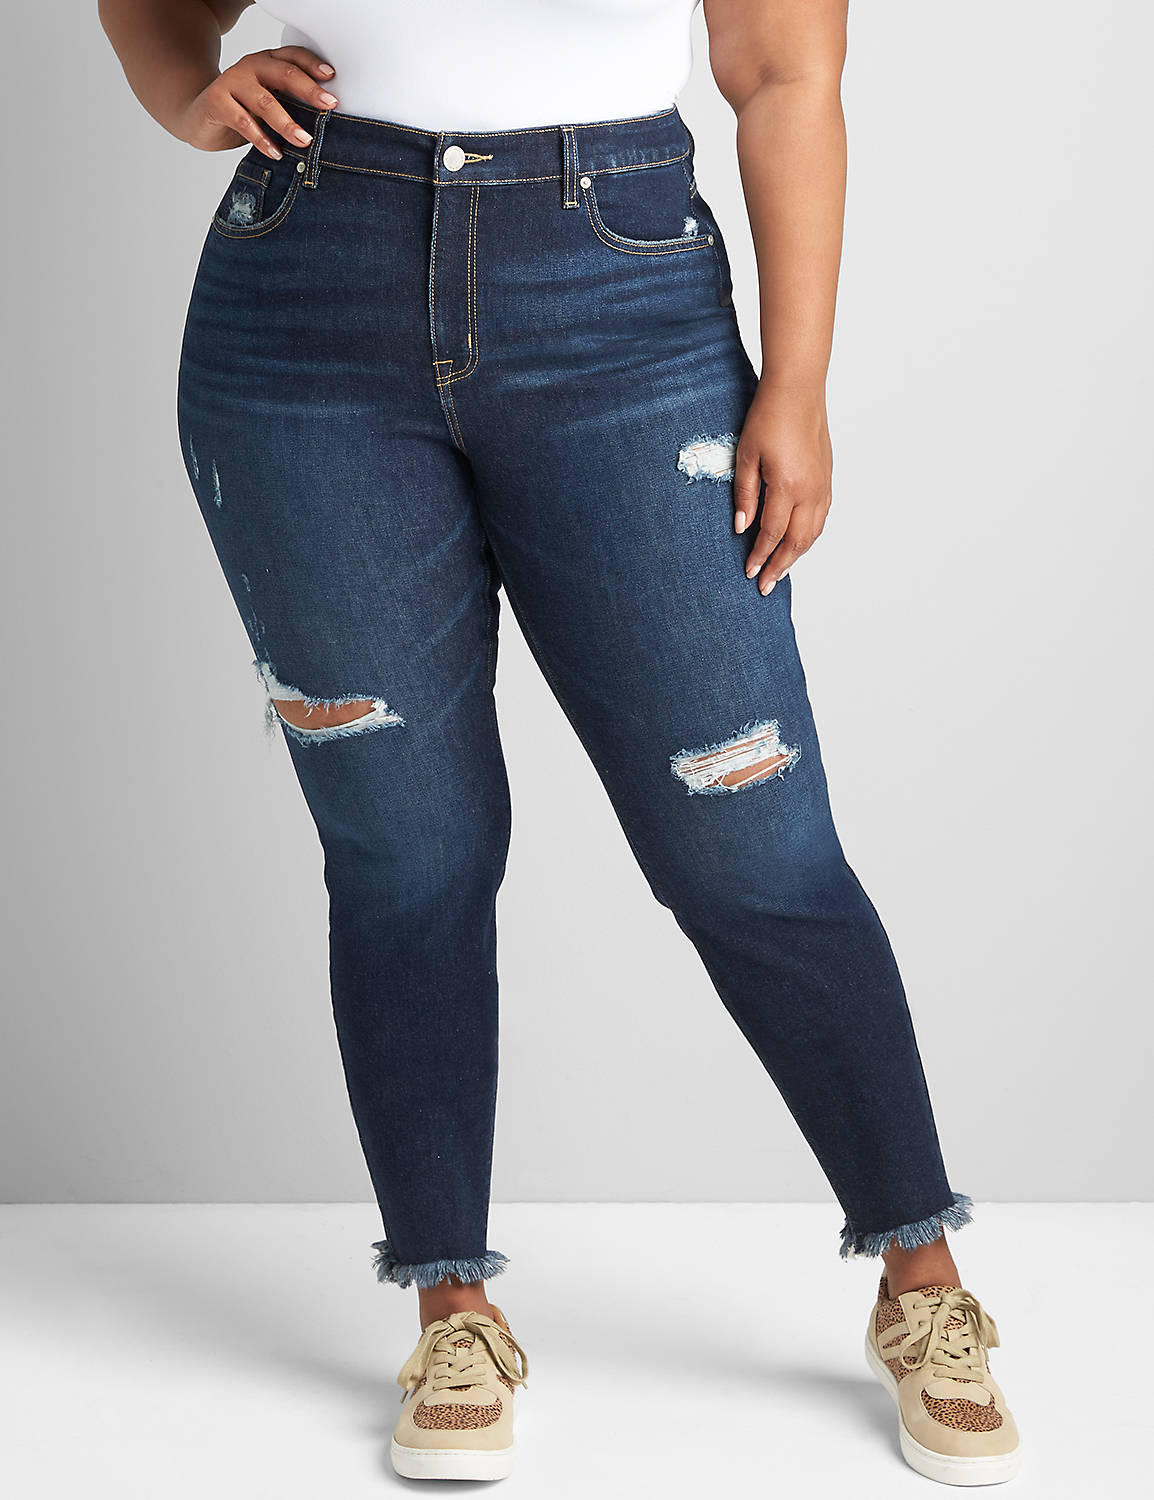 Curvy Fit High-Rise Skinny Jean Product Image 1